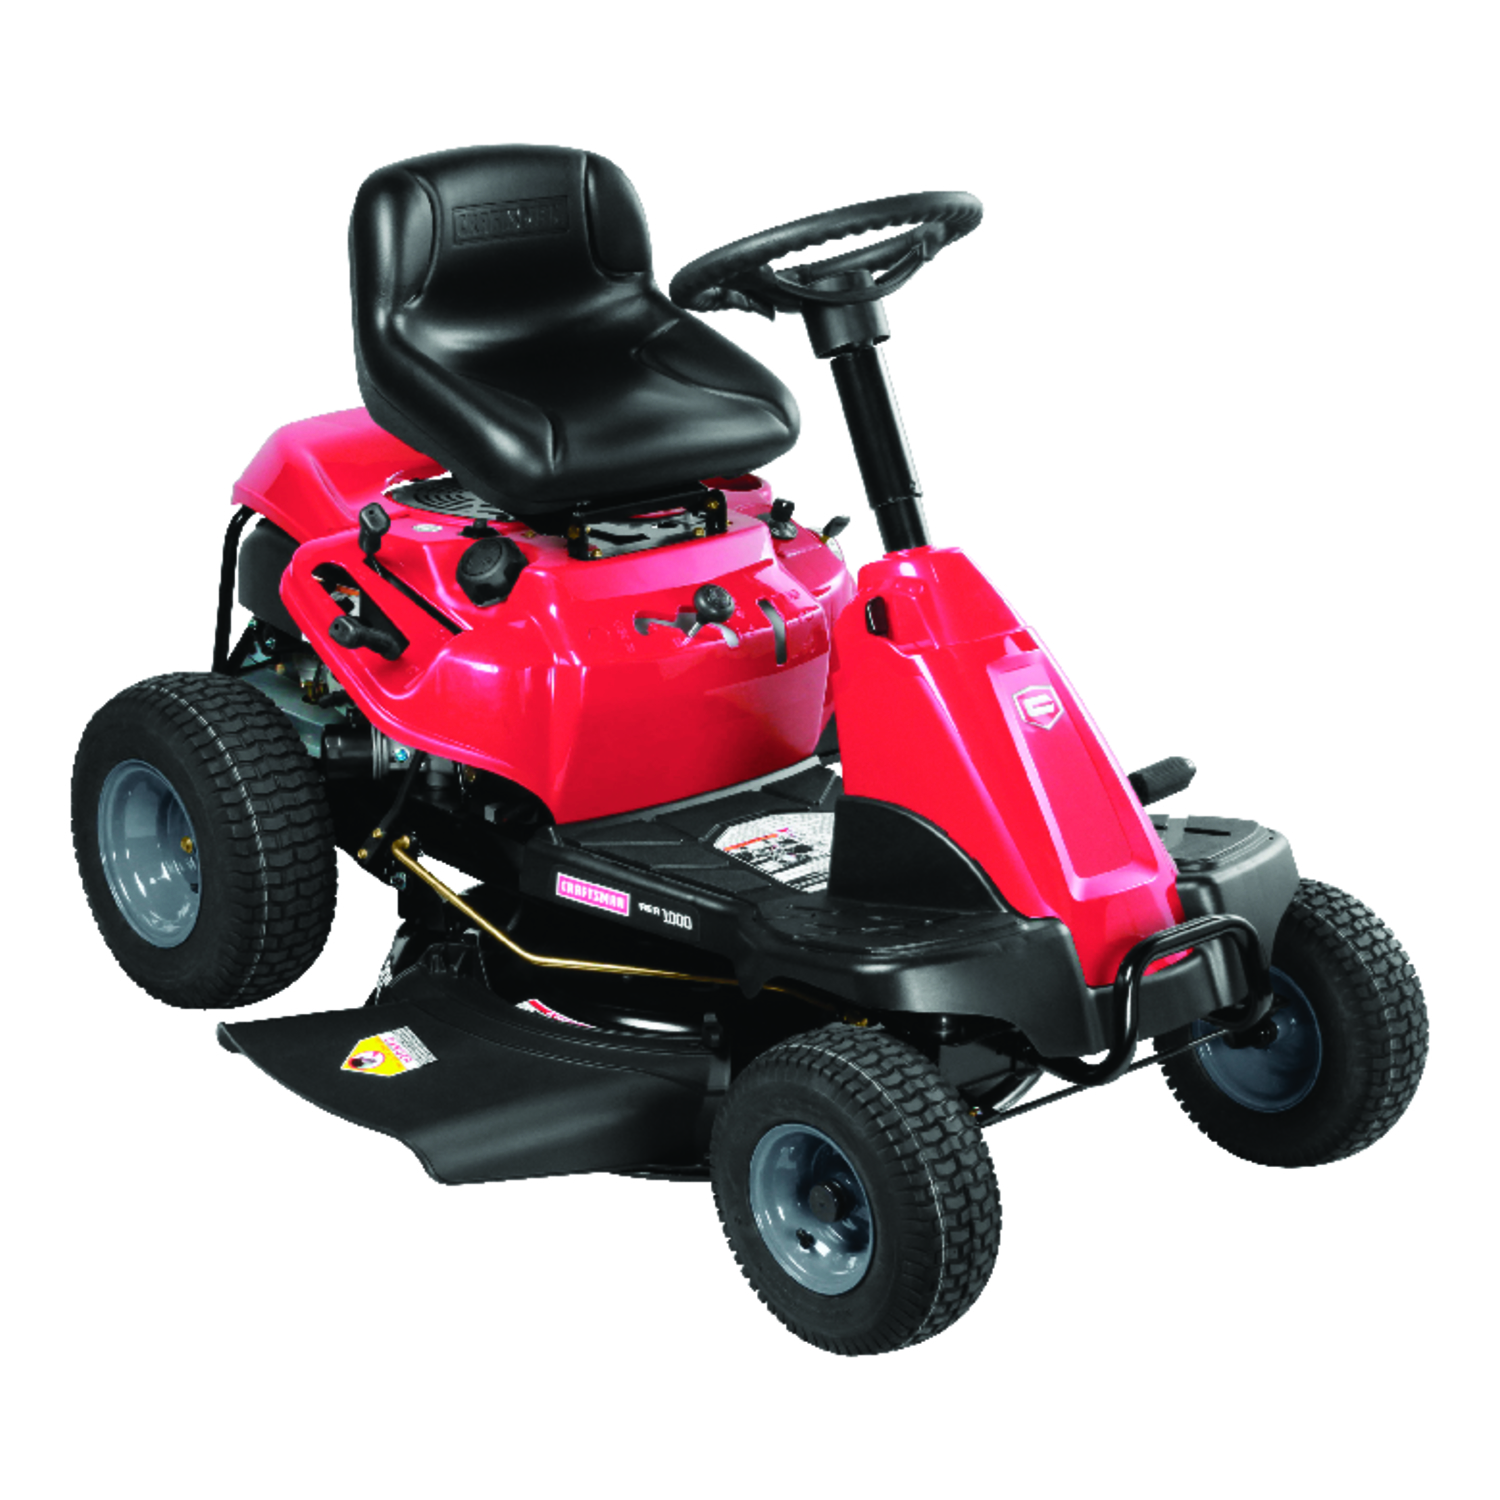 Lawn Mowers and Push Mowers at Ace Hardware